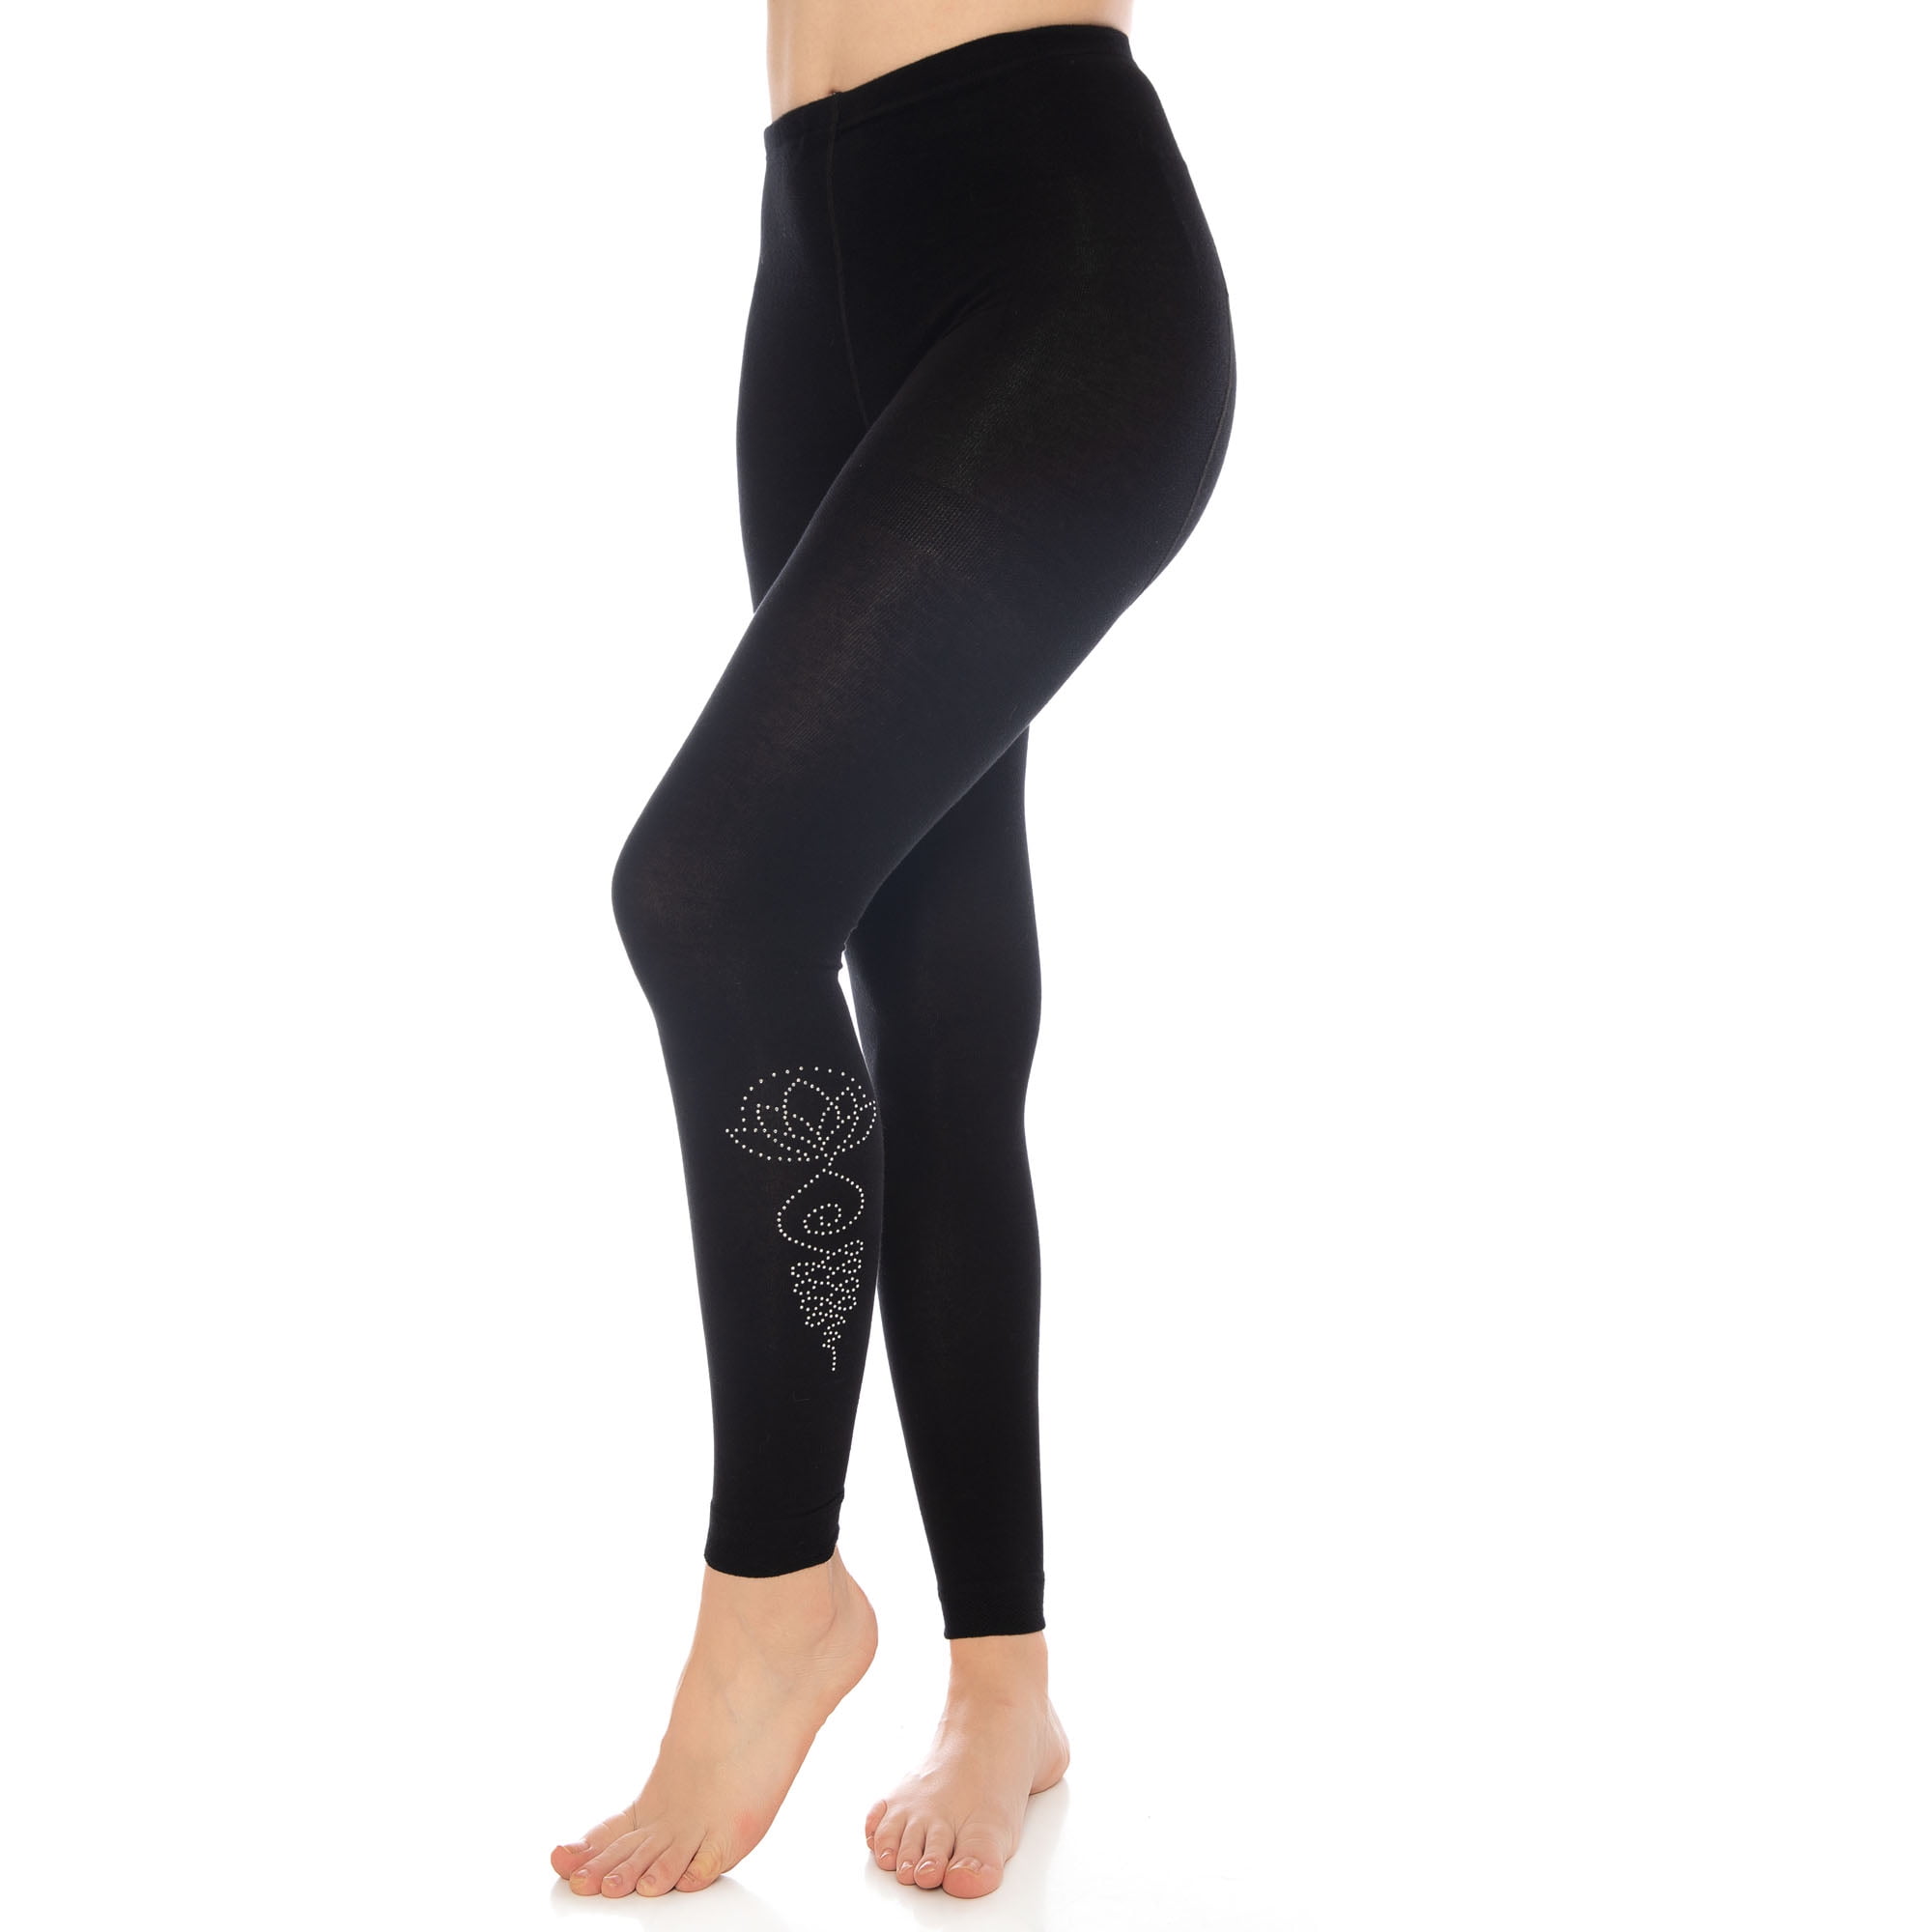 Bamboo Leggings for Women Soft Stretchy Full Length Tight with Fancy  Accessories - S1